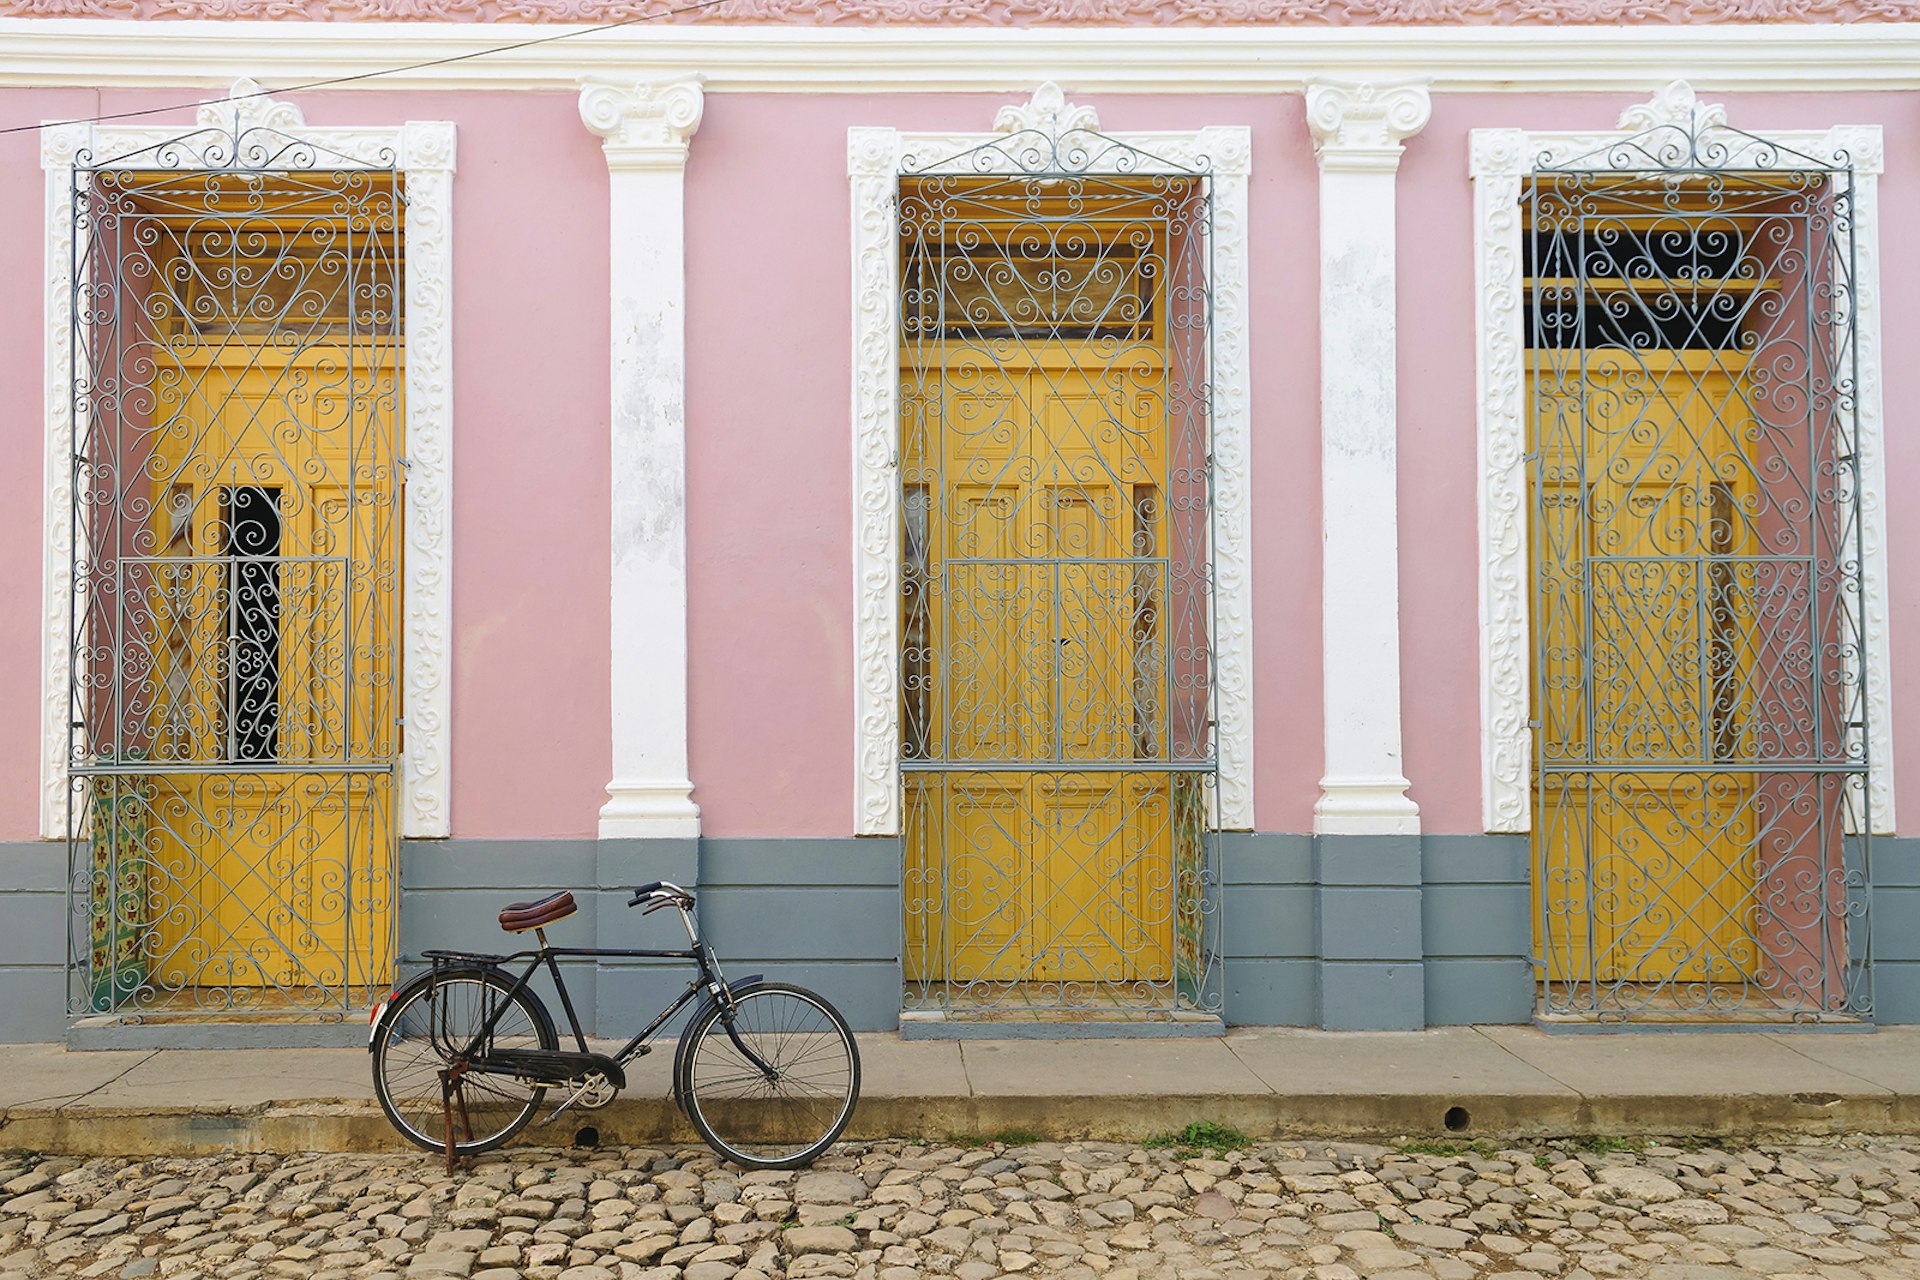 A pastel house in Trinidad © florentina georgescu photography / Getty Images